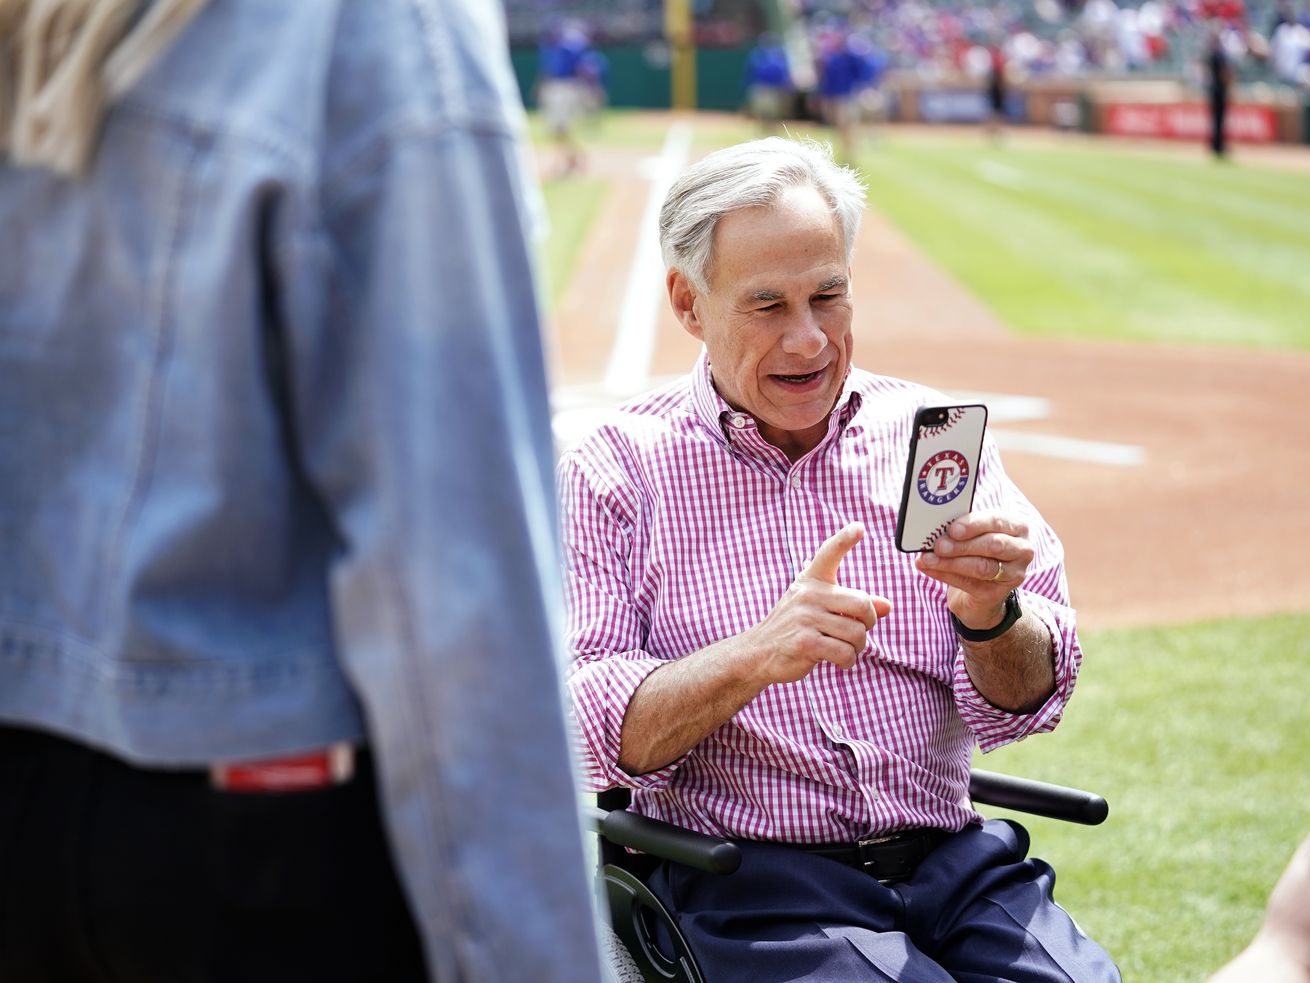 Texas Governor Greg Abbott looks at his phone while seated on a baseball field.